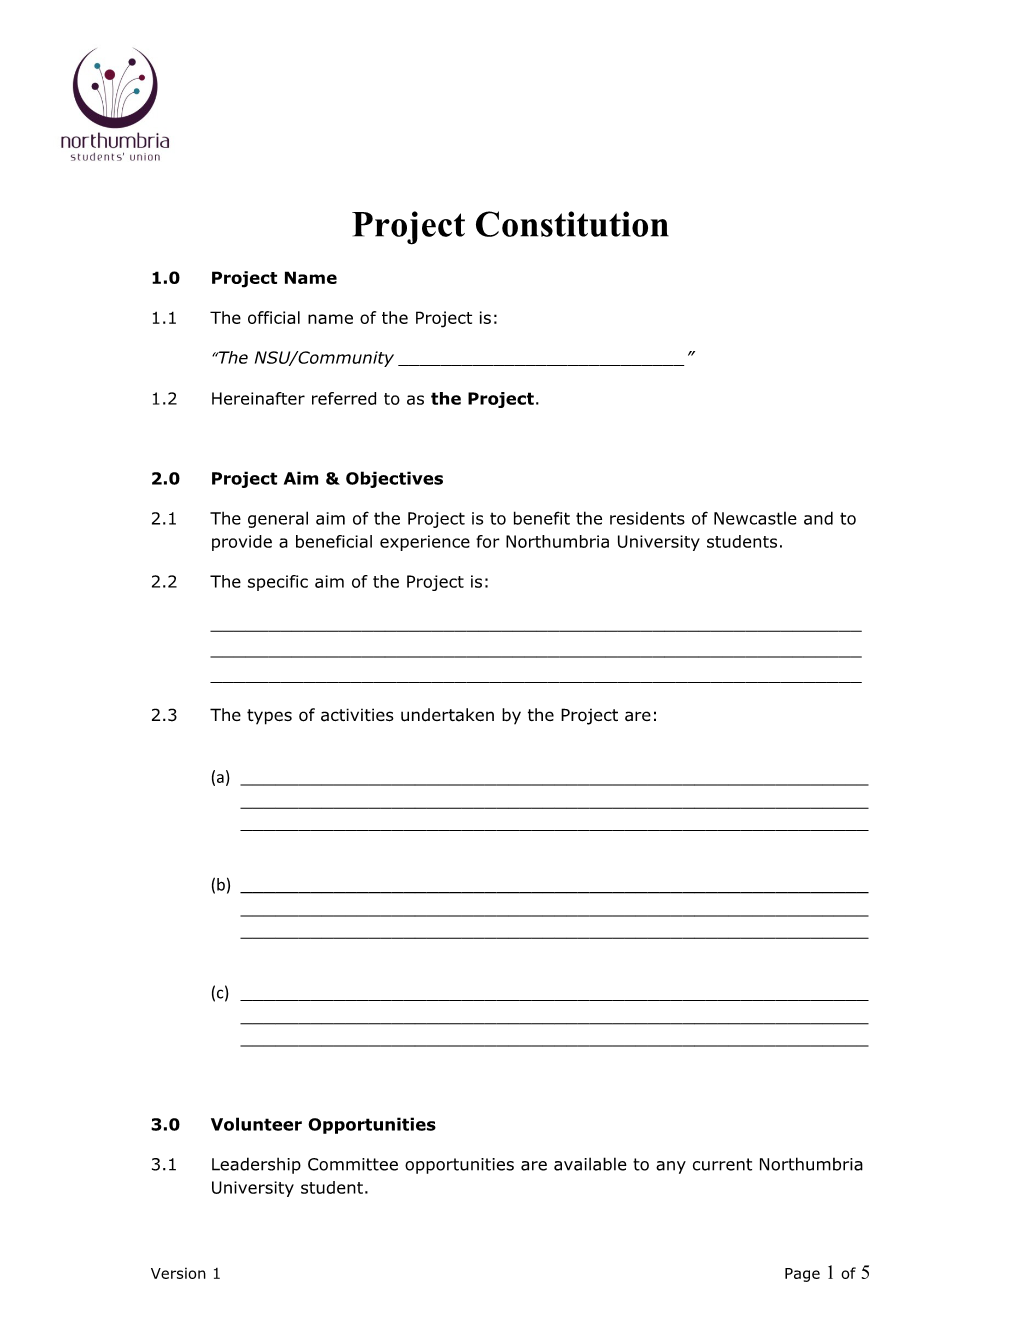 Project Constitution